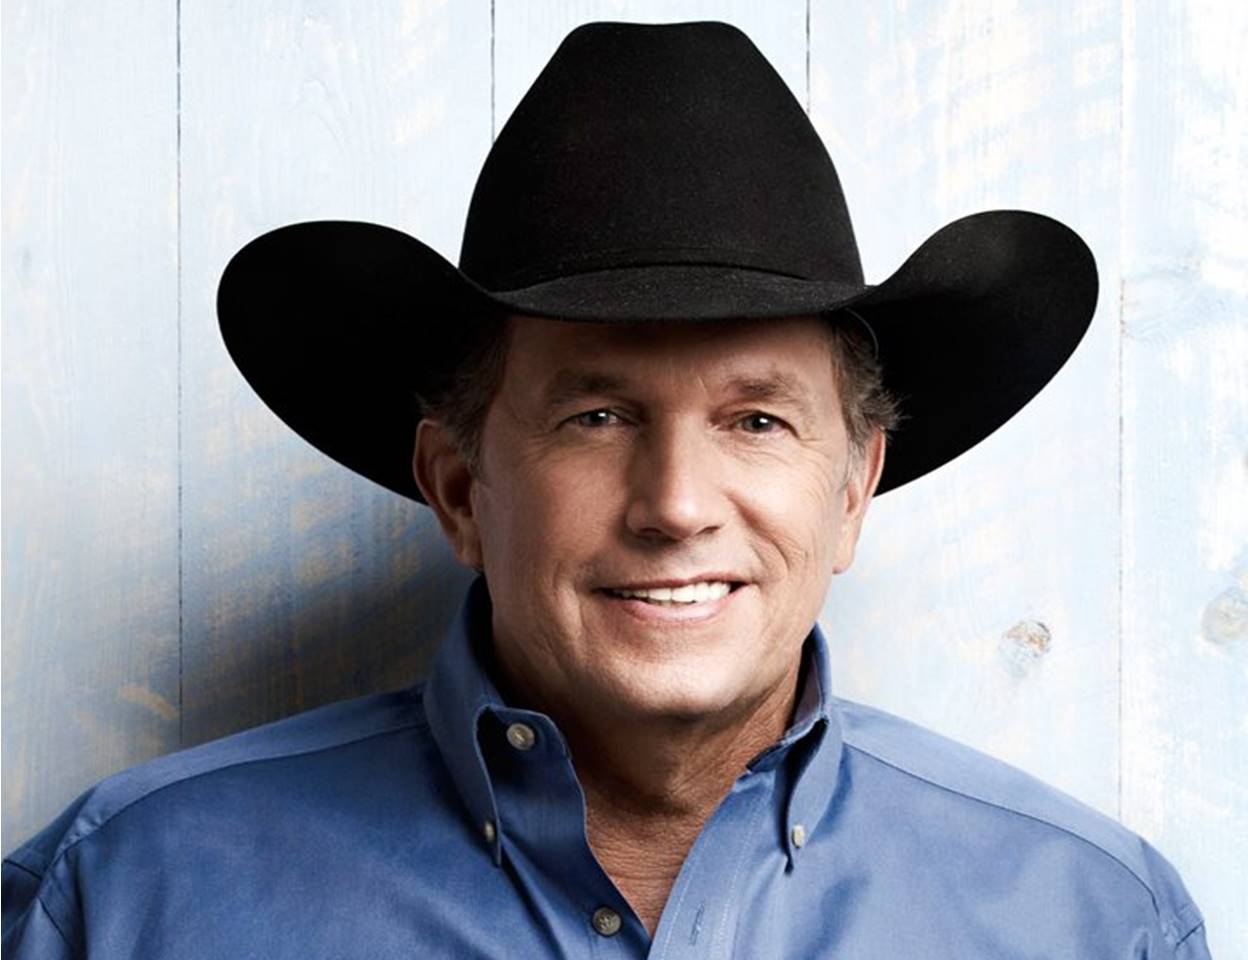 Strait Out of the Box Part 2, george strait